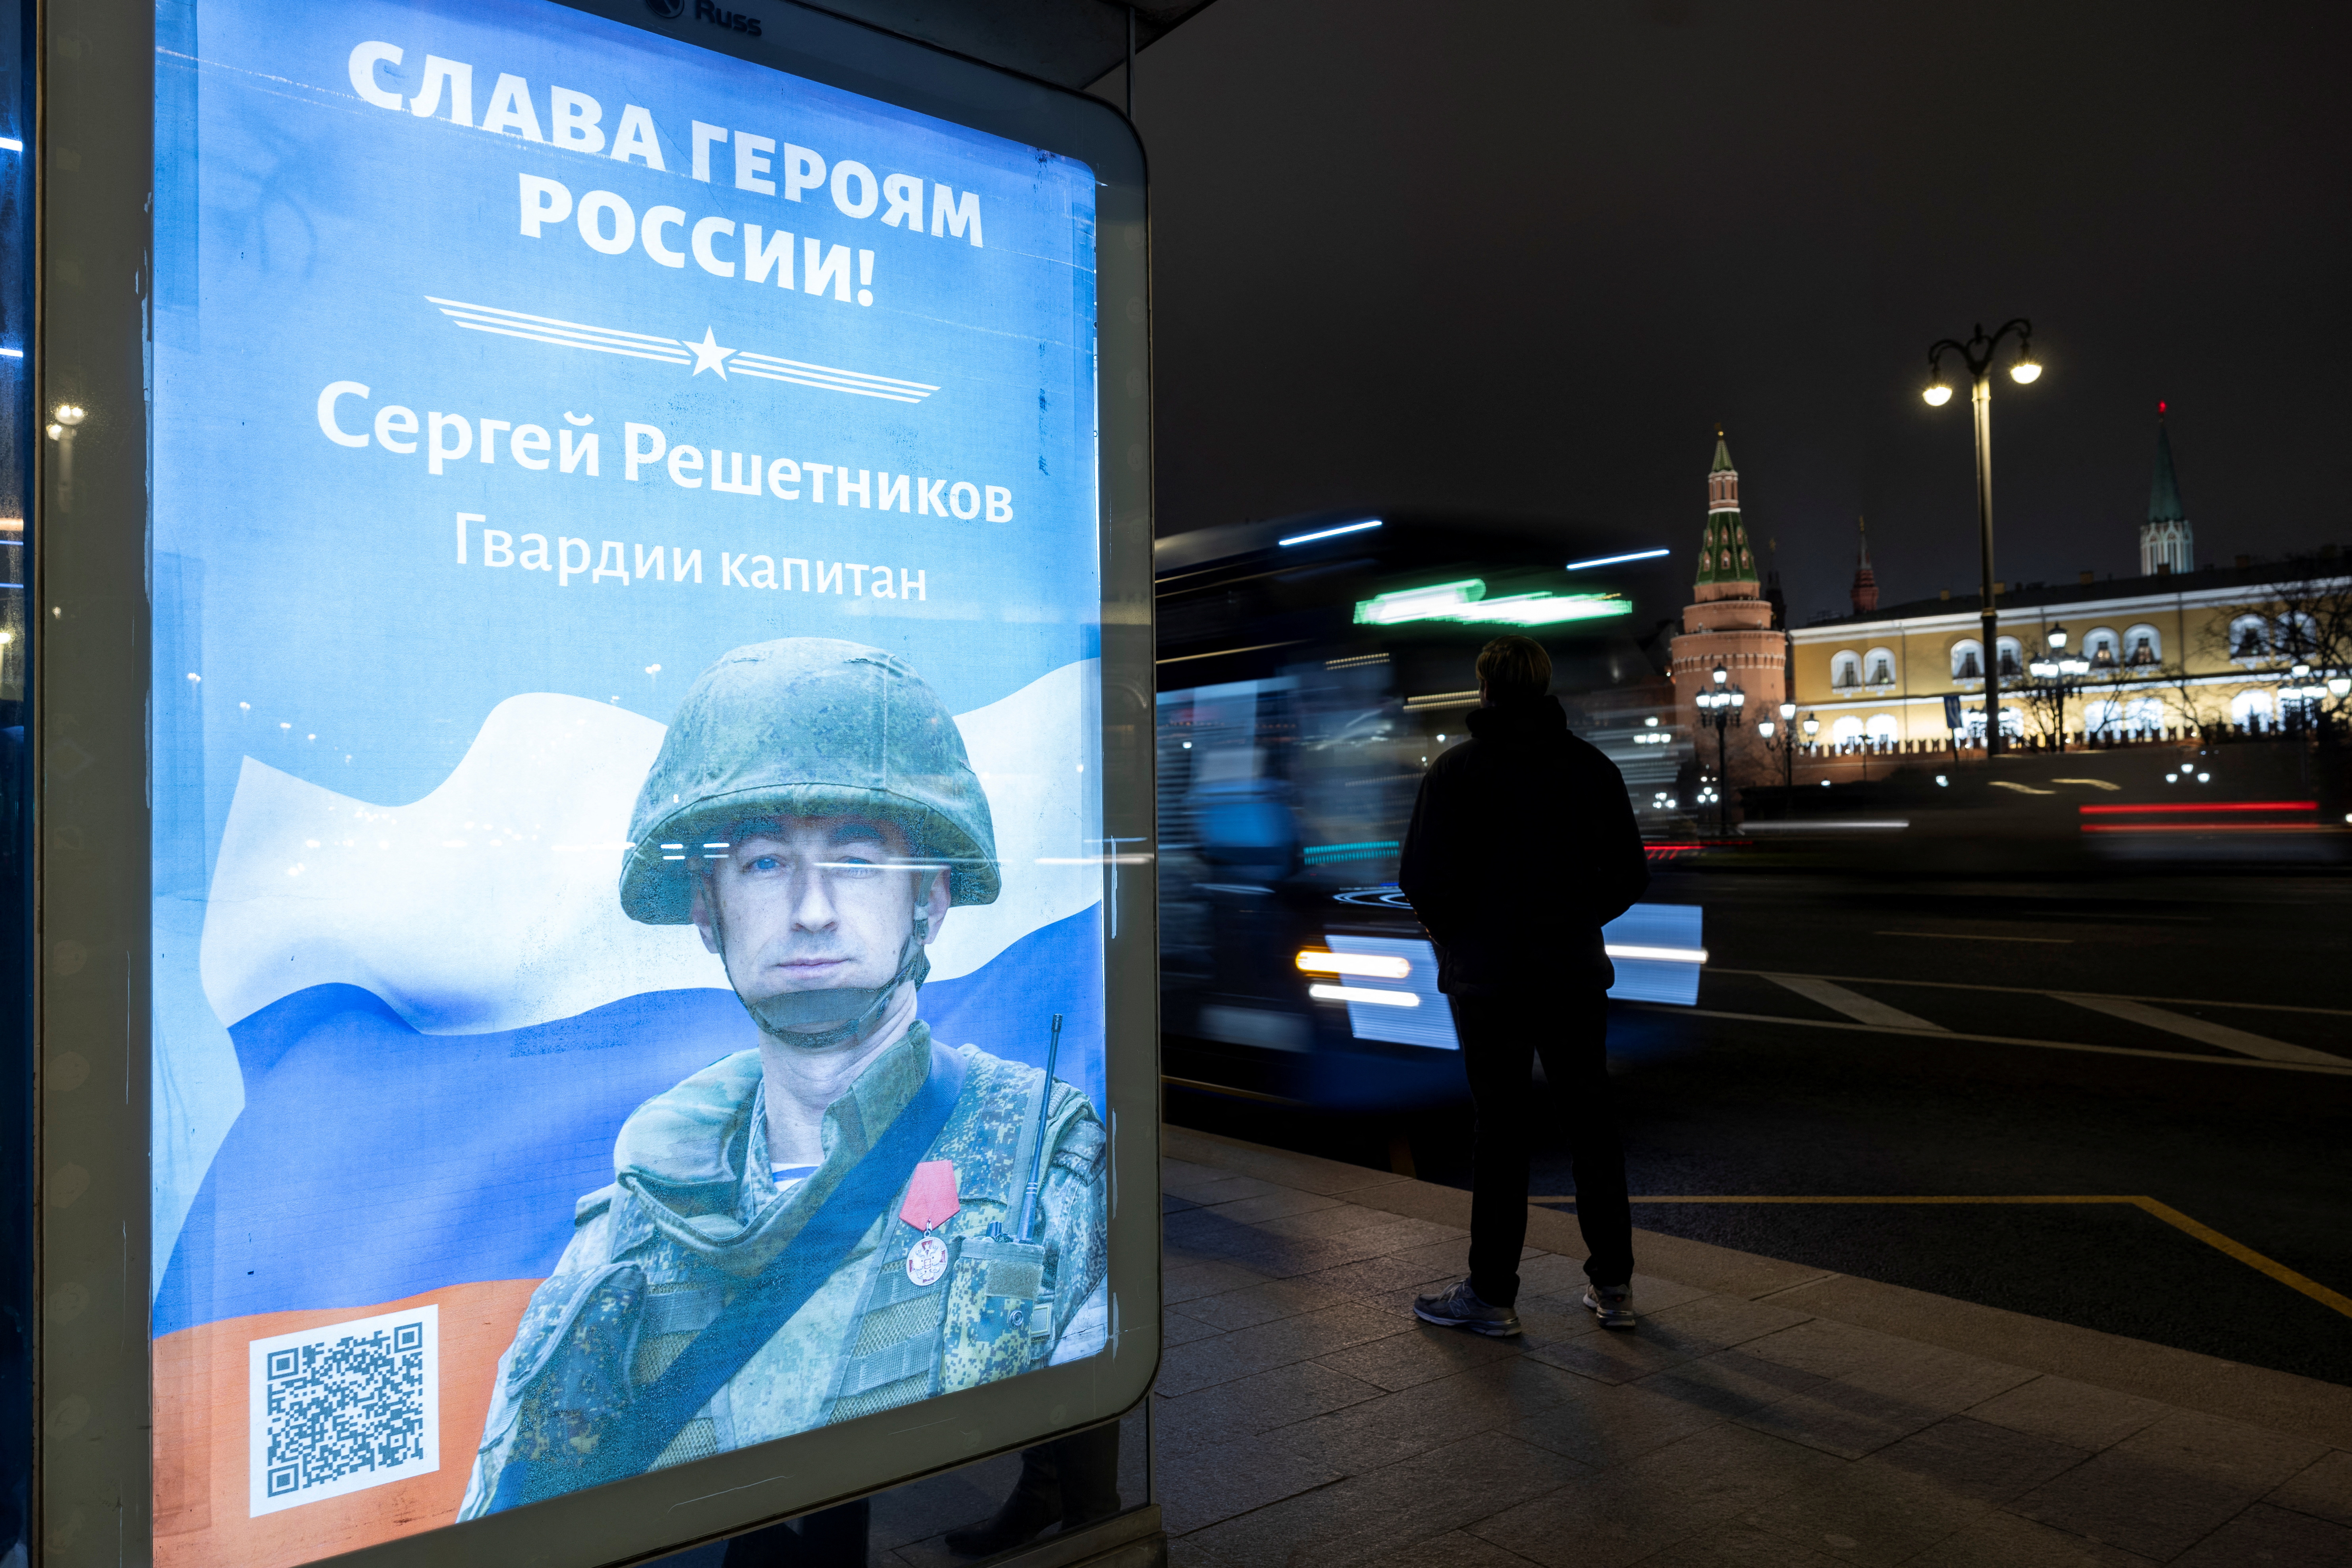 A person waits for a bus at a bus stop with a board displaying an image of Russian service member in Moscow